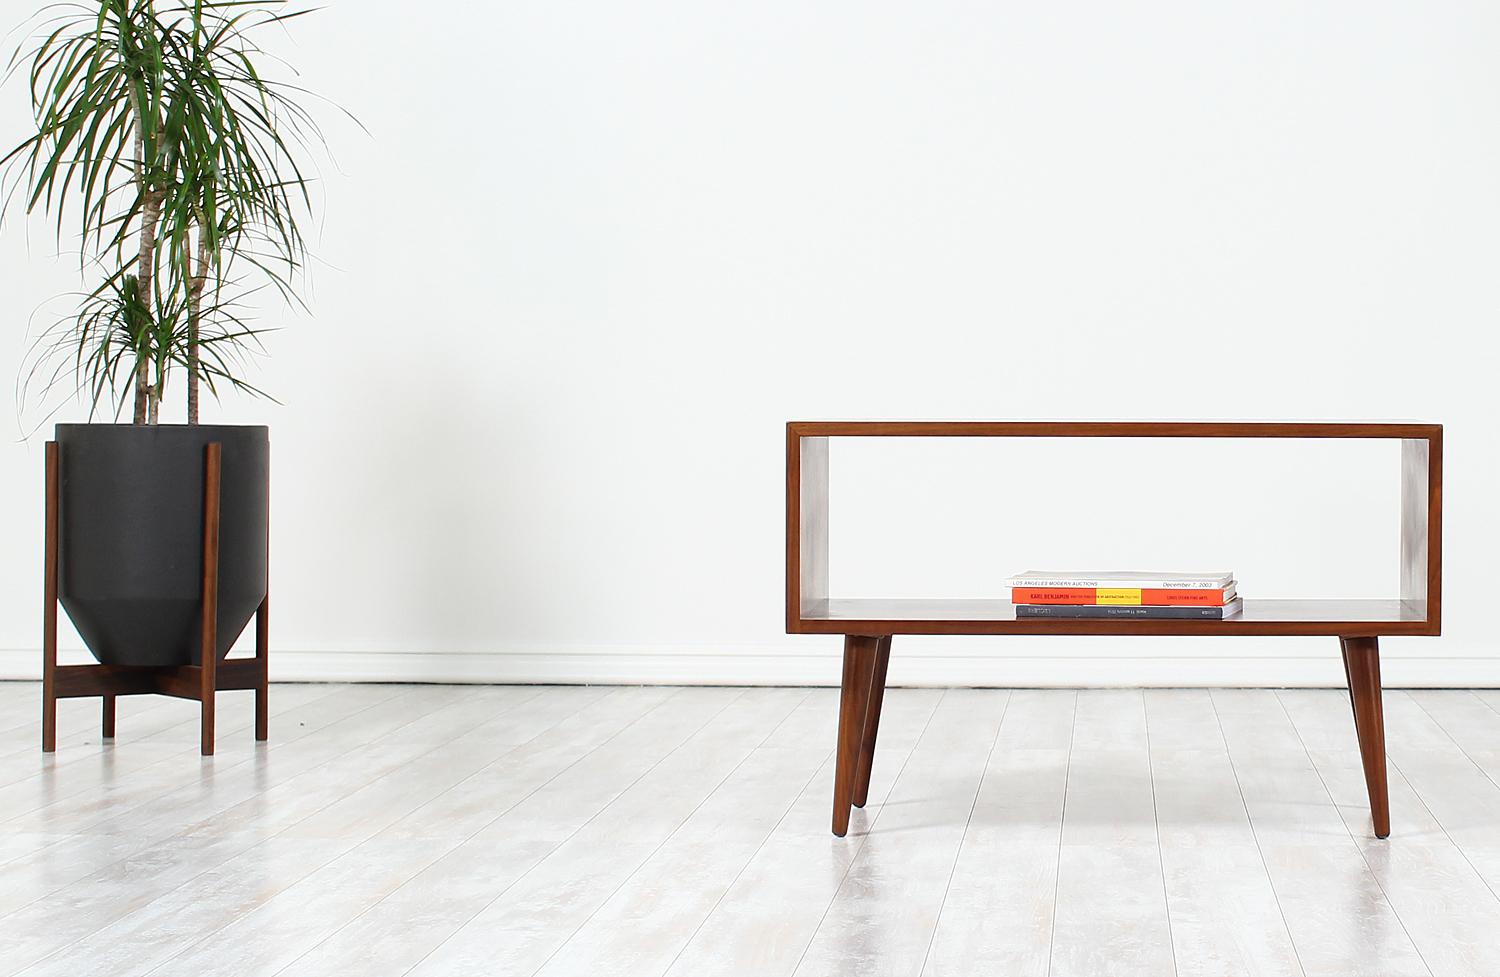 Minimalist console table designed by Milo Baughman for Glenn of California in the United States circa 1950’s. This Mid-Century Modern classic design features a solidly crafted walnut wood open rectangular case providing various display and usage